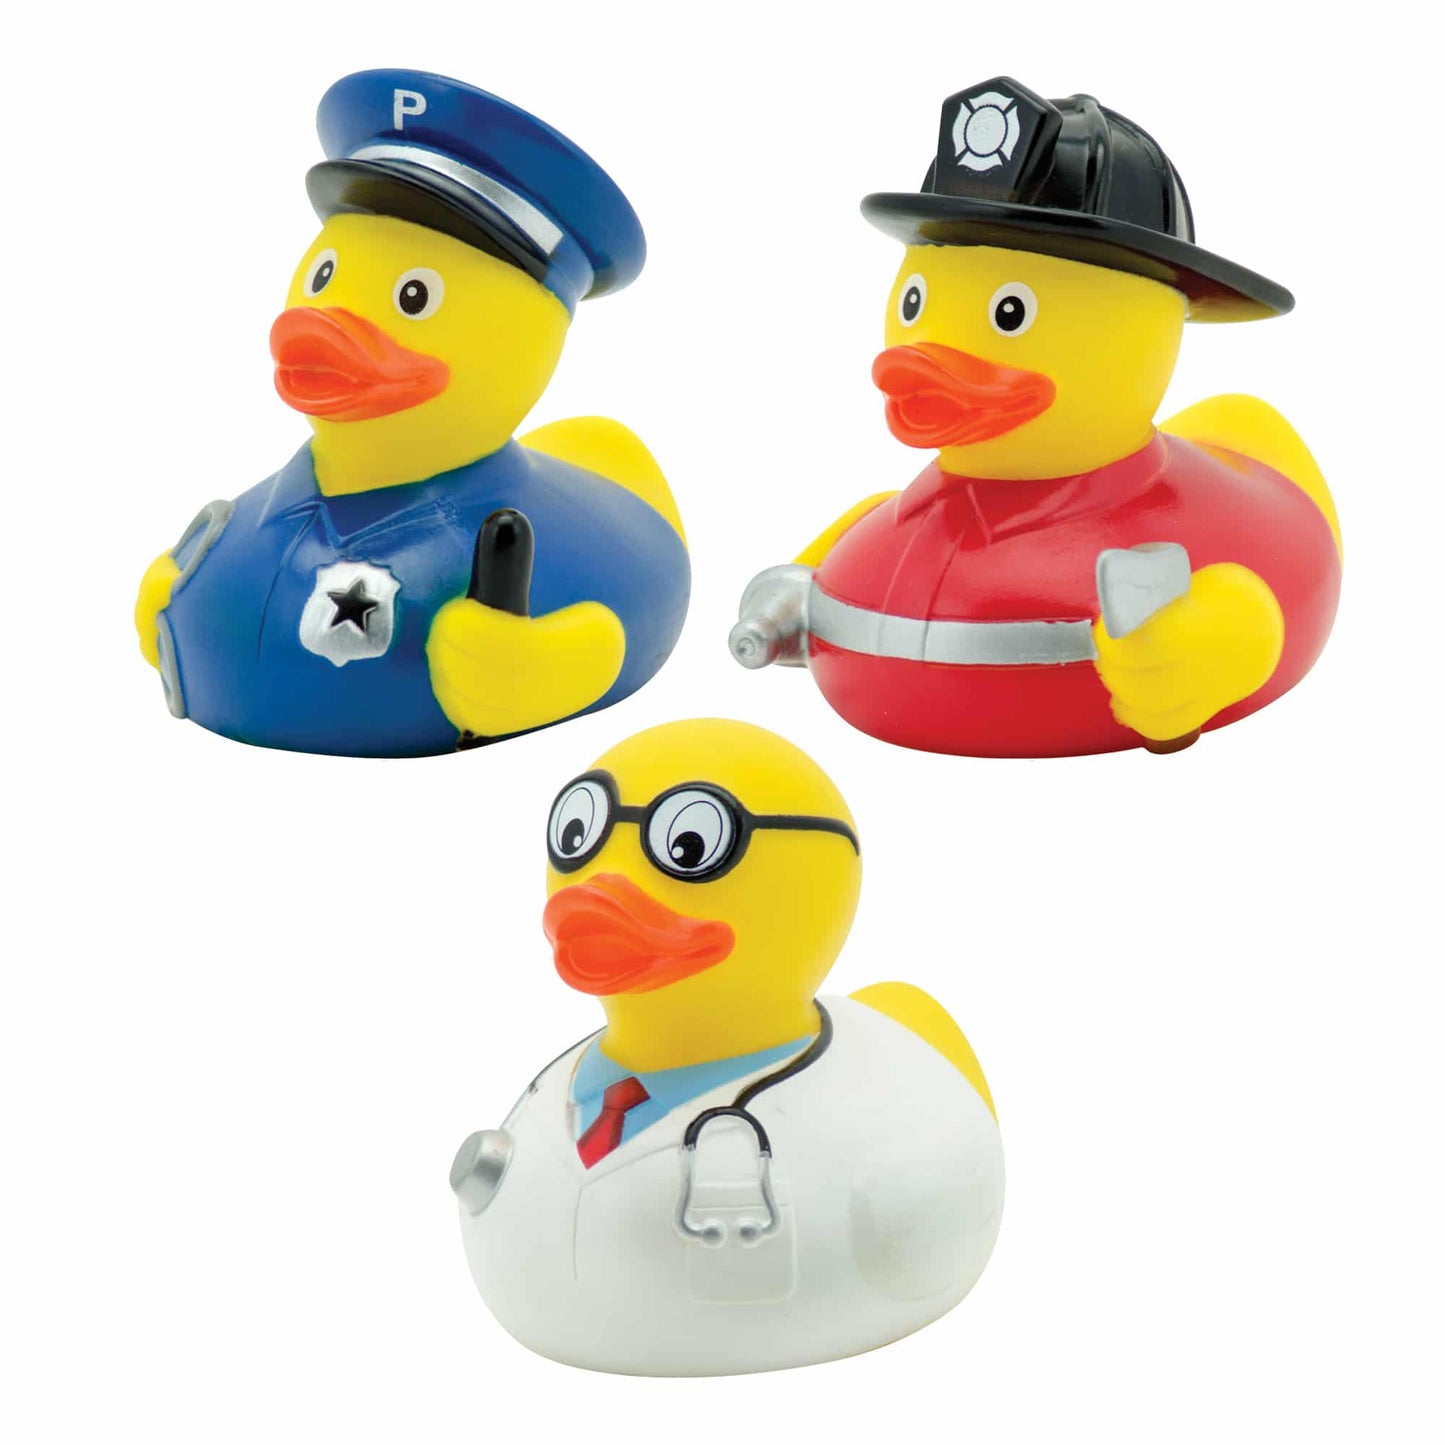 Rubber Duckie Occupational